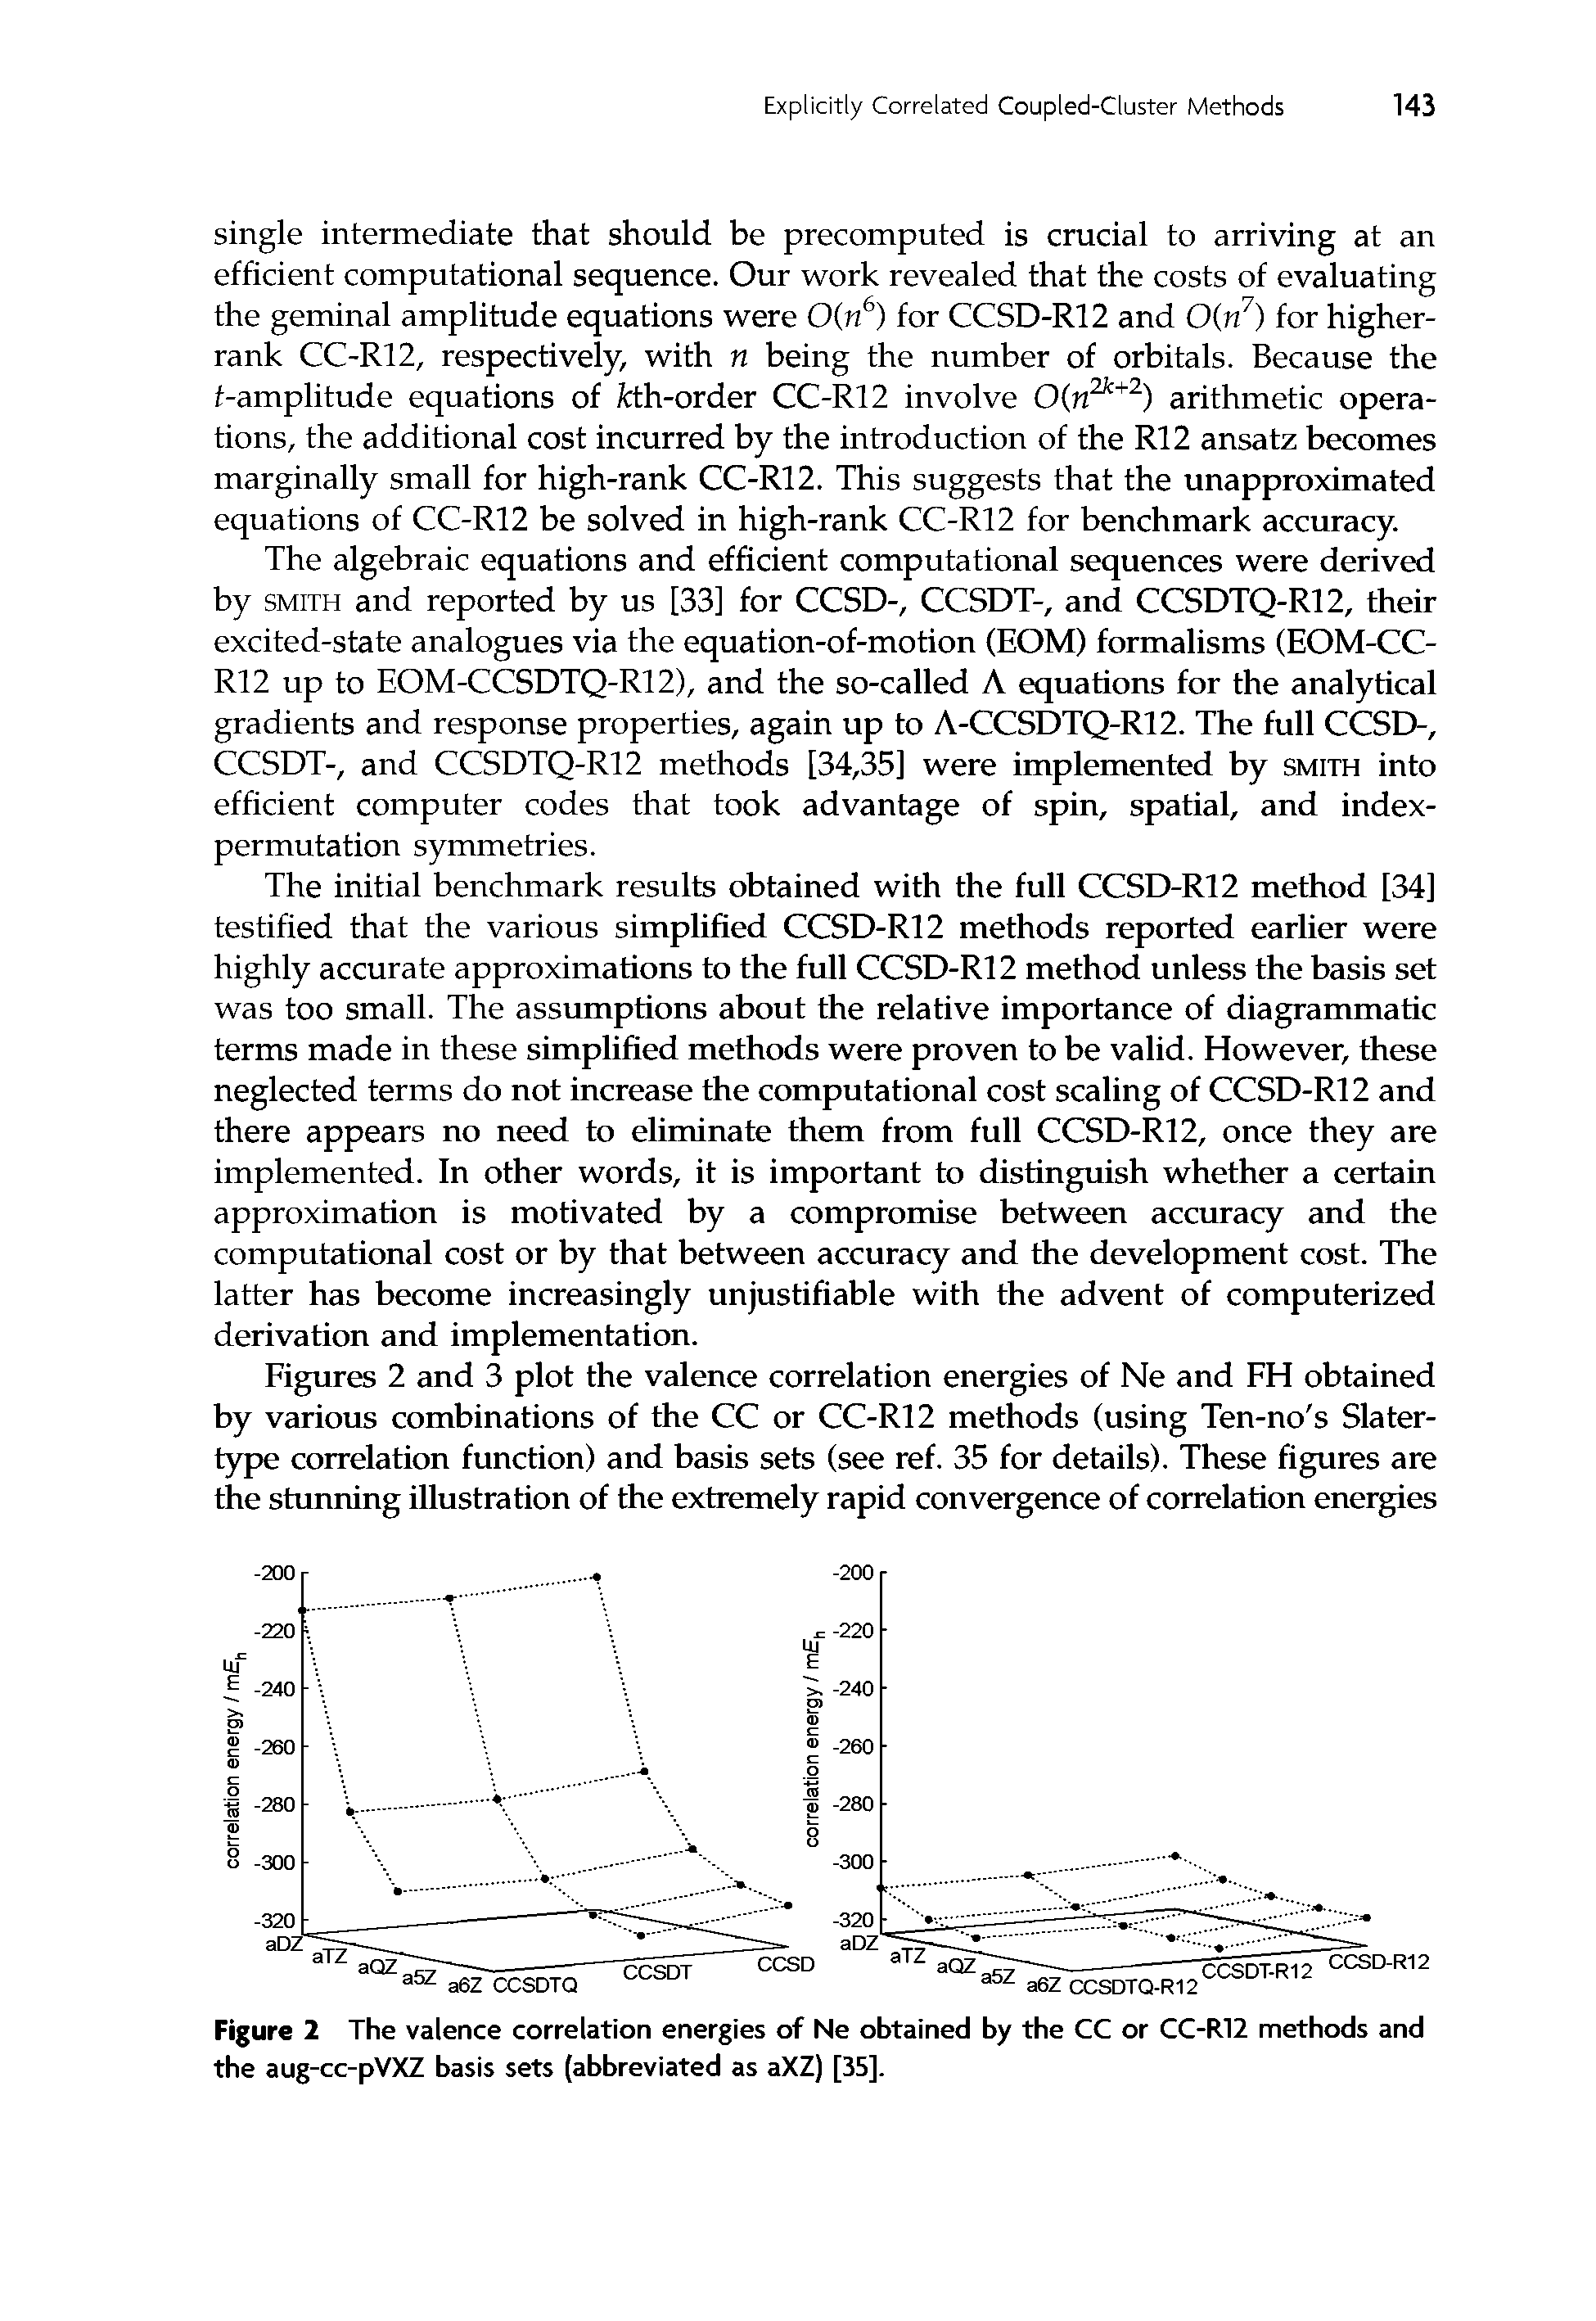 Figure 2 The valence correlation energies of Ne obtained by the CC or CC-R12 methods and the aug-cc-pVXZ basis sets (abbreviated as aXZ) [35].